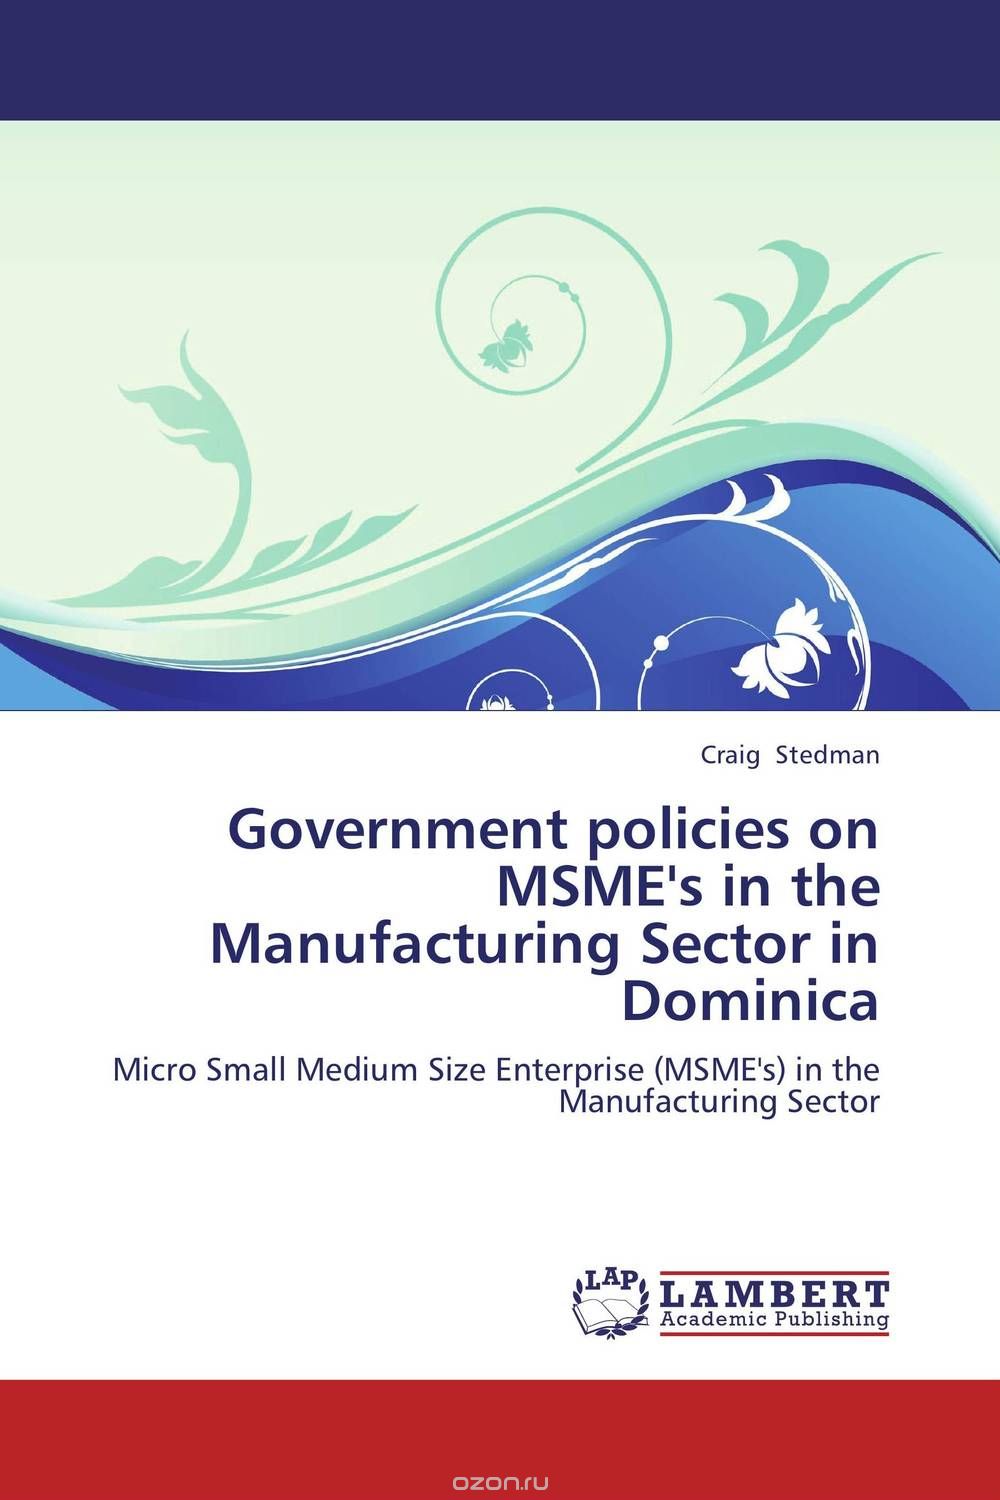 Скачать книгу "Government policies on MSME's in the Manufacturing Sector in Dominica"